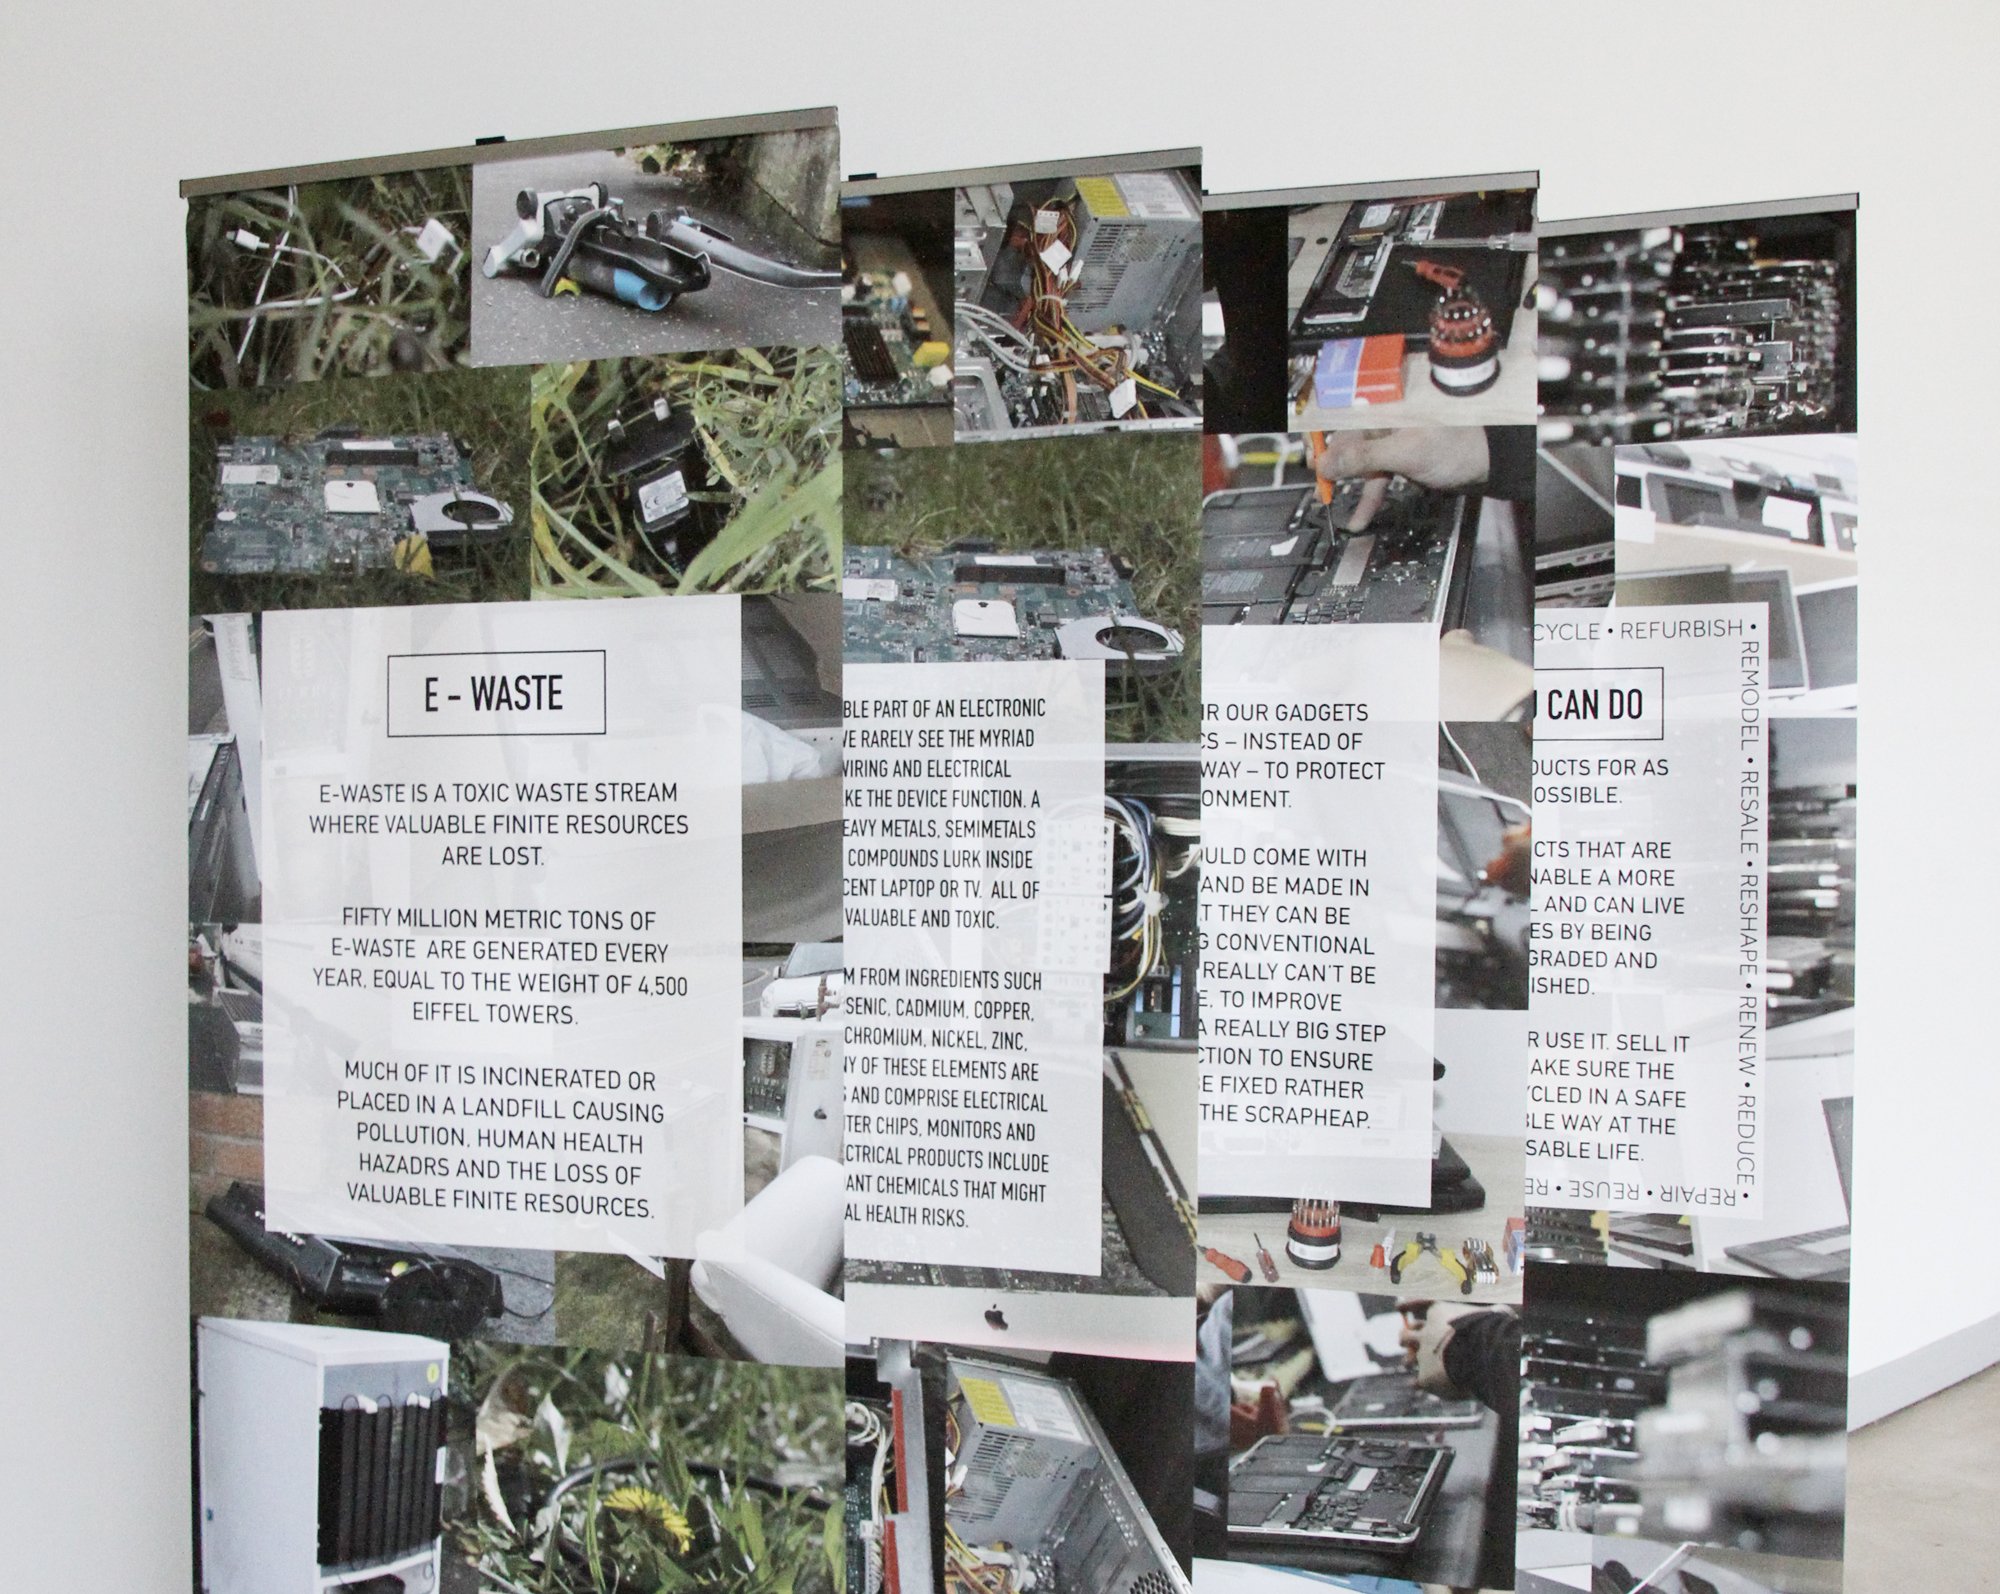 Image of four pop up panels, with images of wires, cables, microchips and other electronic waste on them, each panel explains the ways we can recude our E-waste by recycling, repairing, or reusing it.